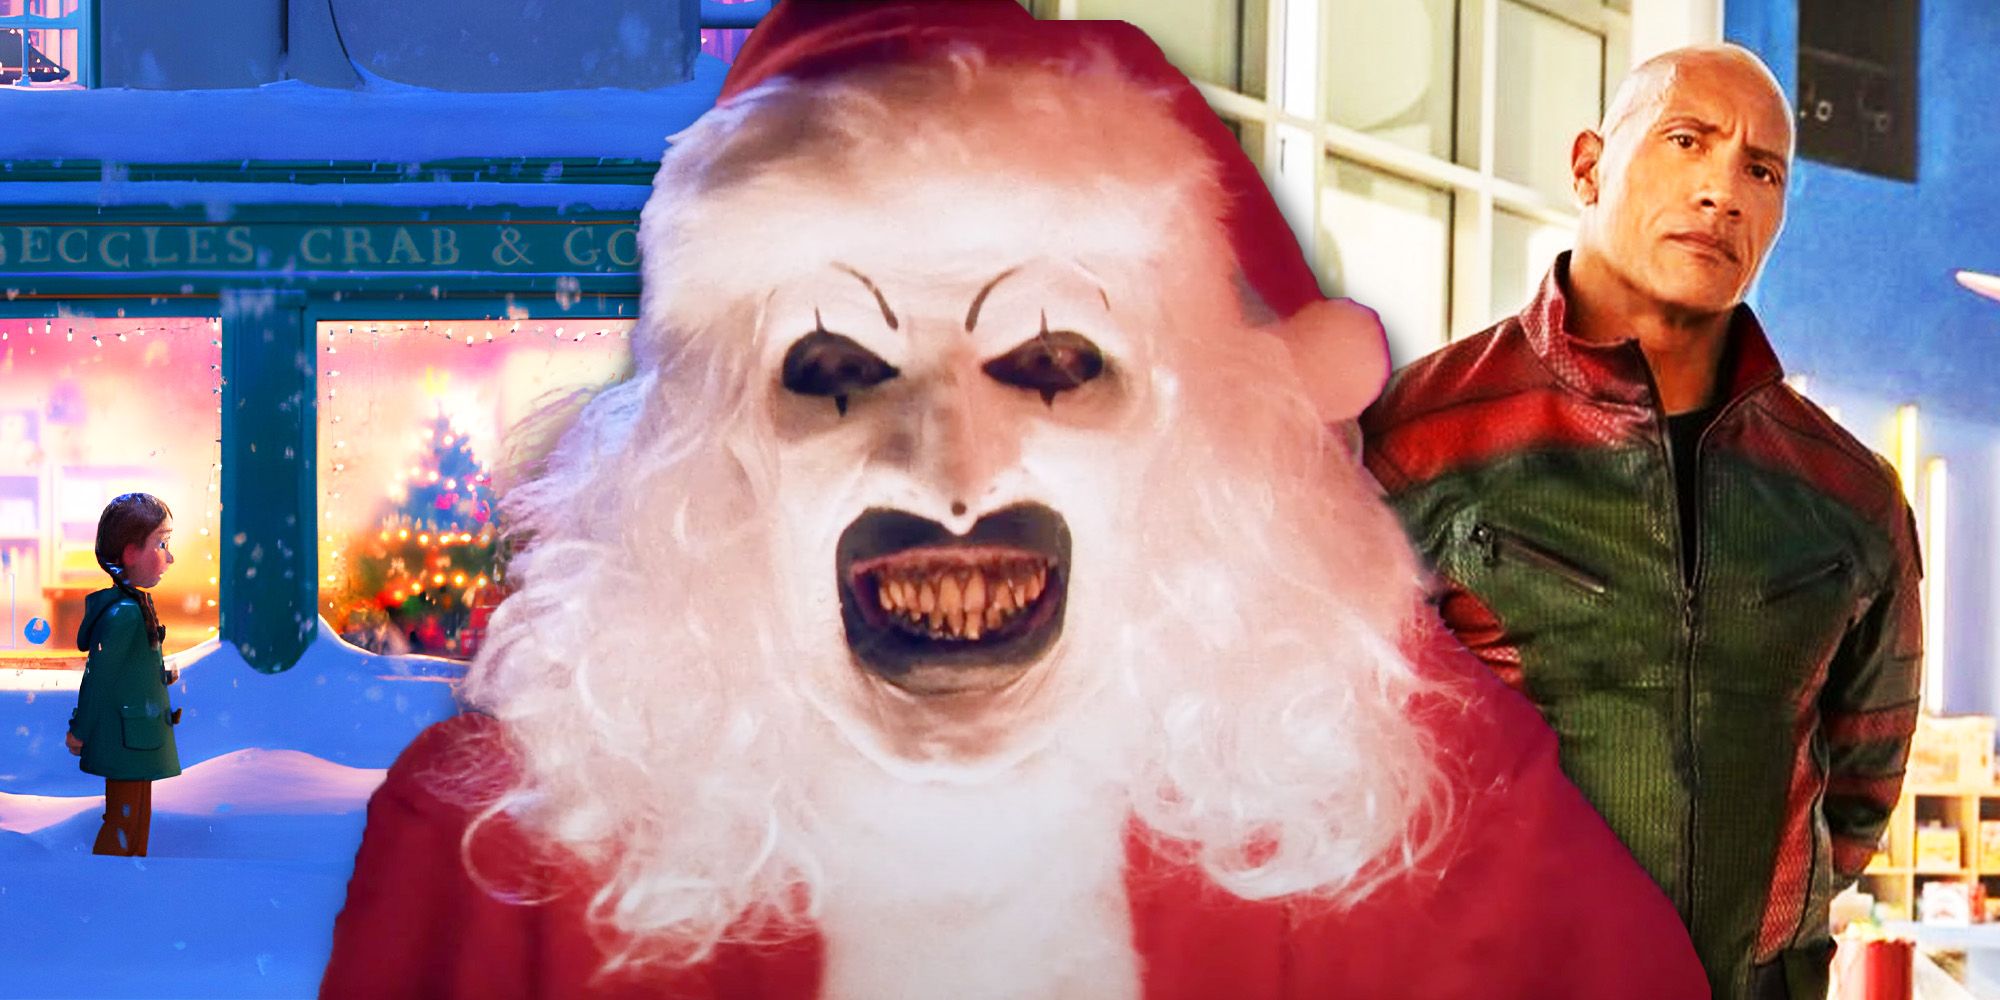 Composite of Netflix's That Christmas, Art the Clown in a Santa suit in Terrifier 3, and Dwayne Johnson in Red One